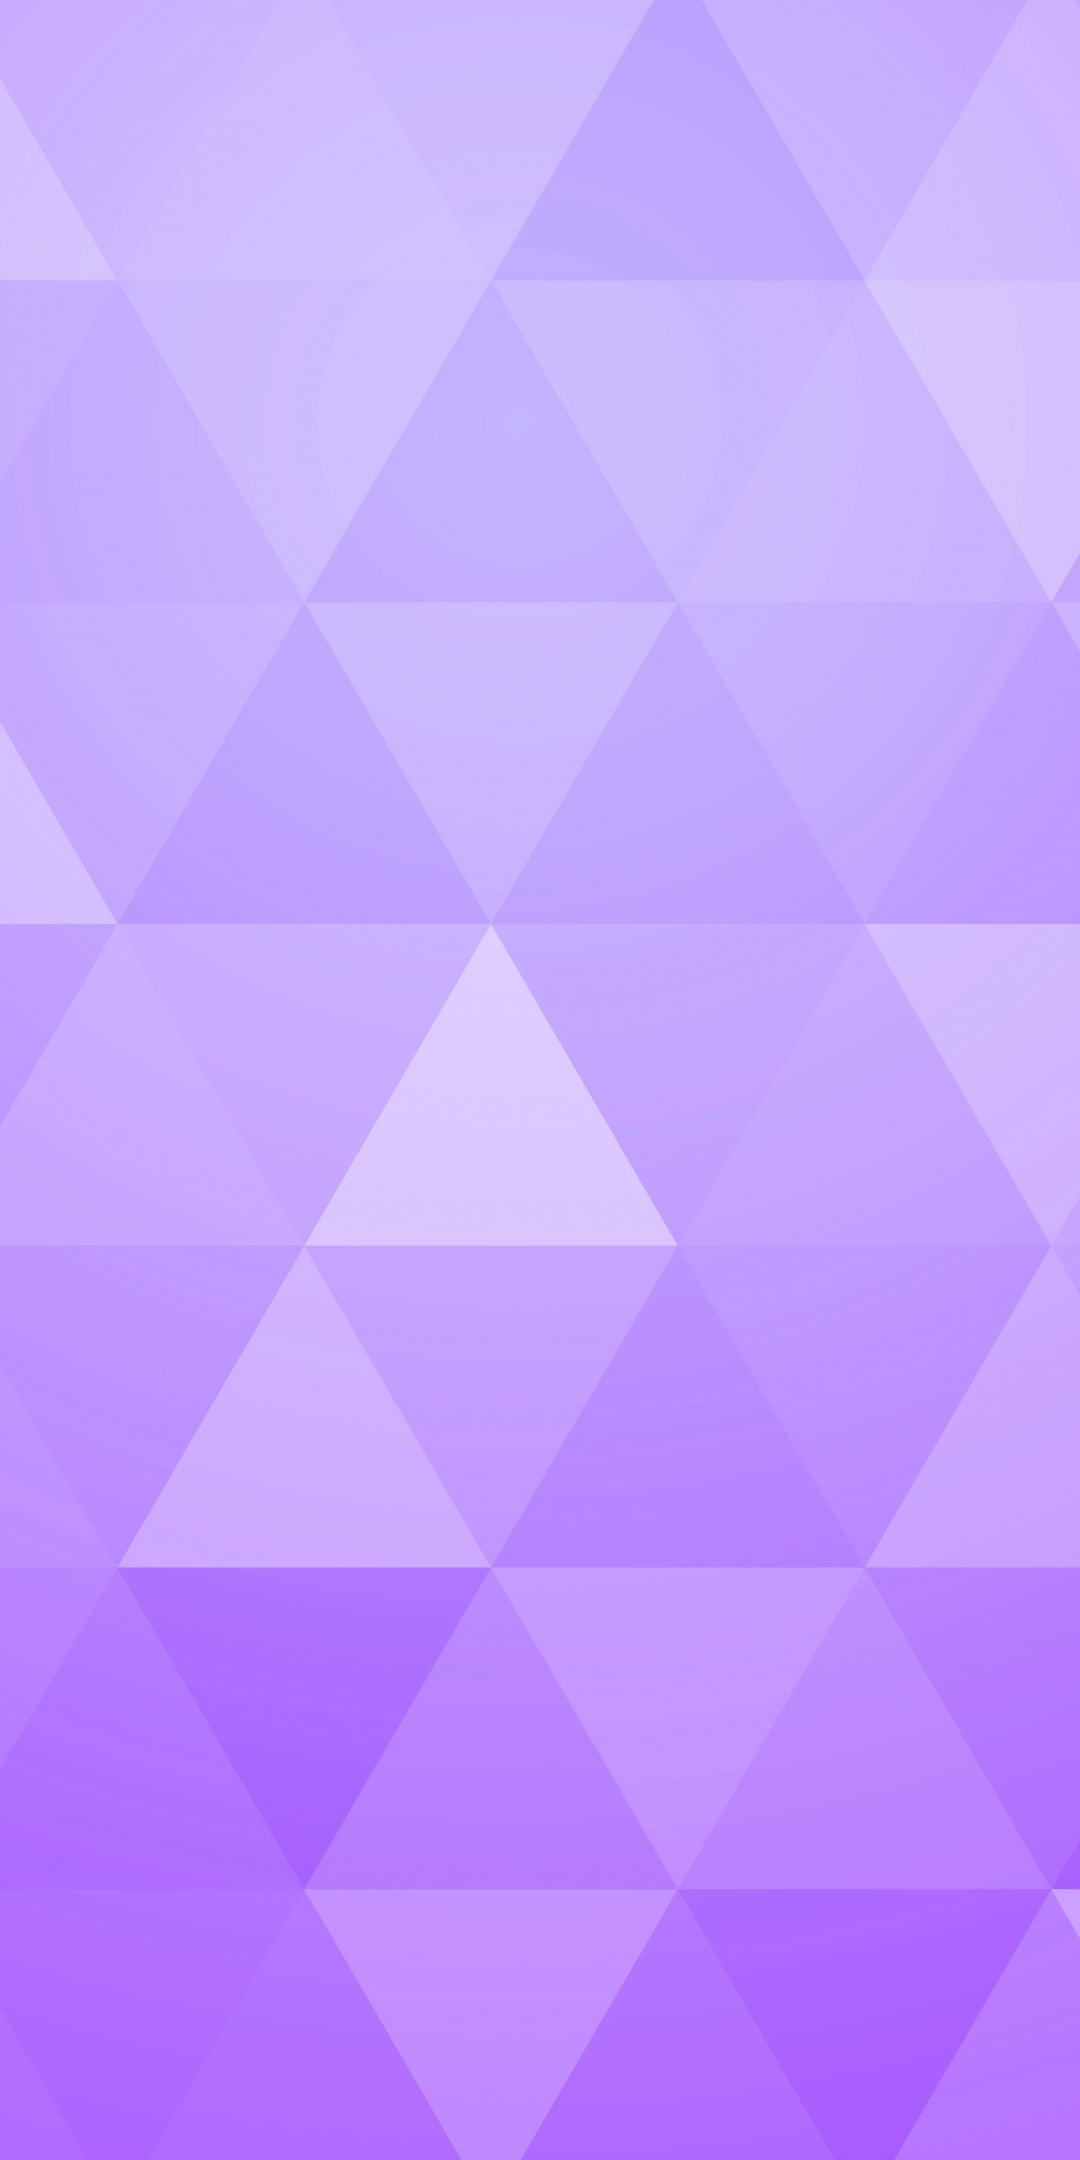 Triangles, minimal, abstract, violet and blue, 1080x2160 wallpaper